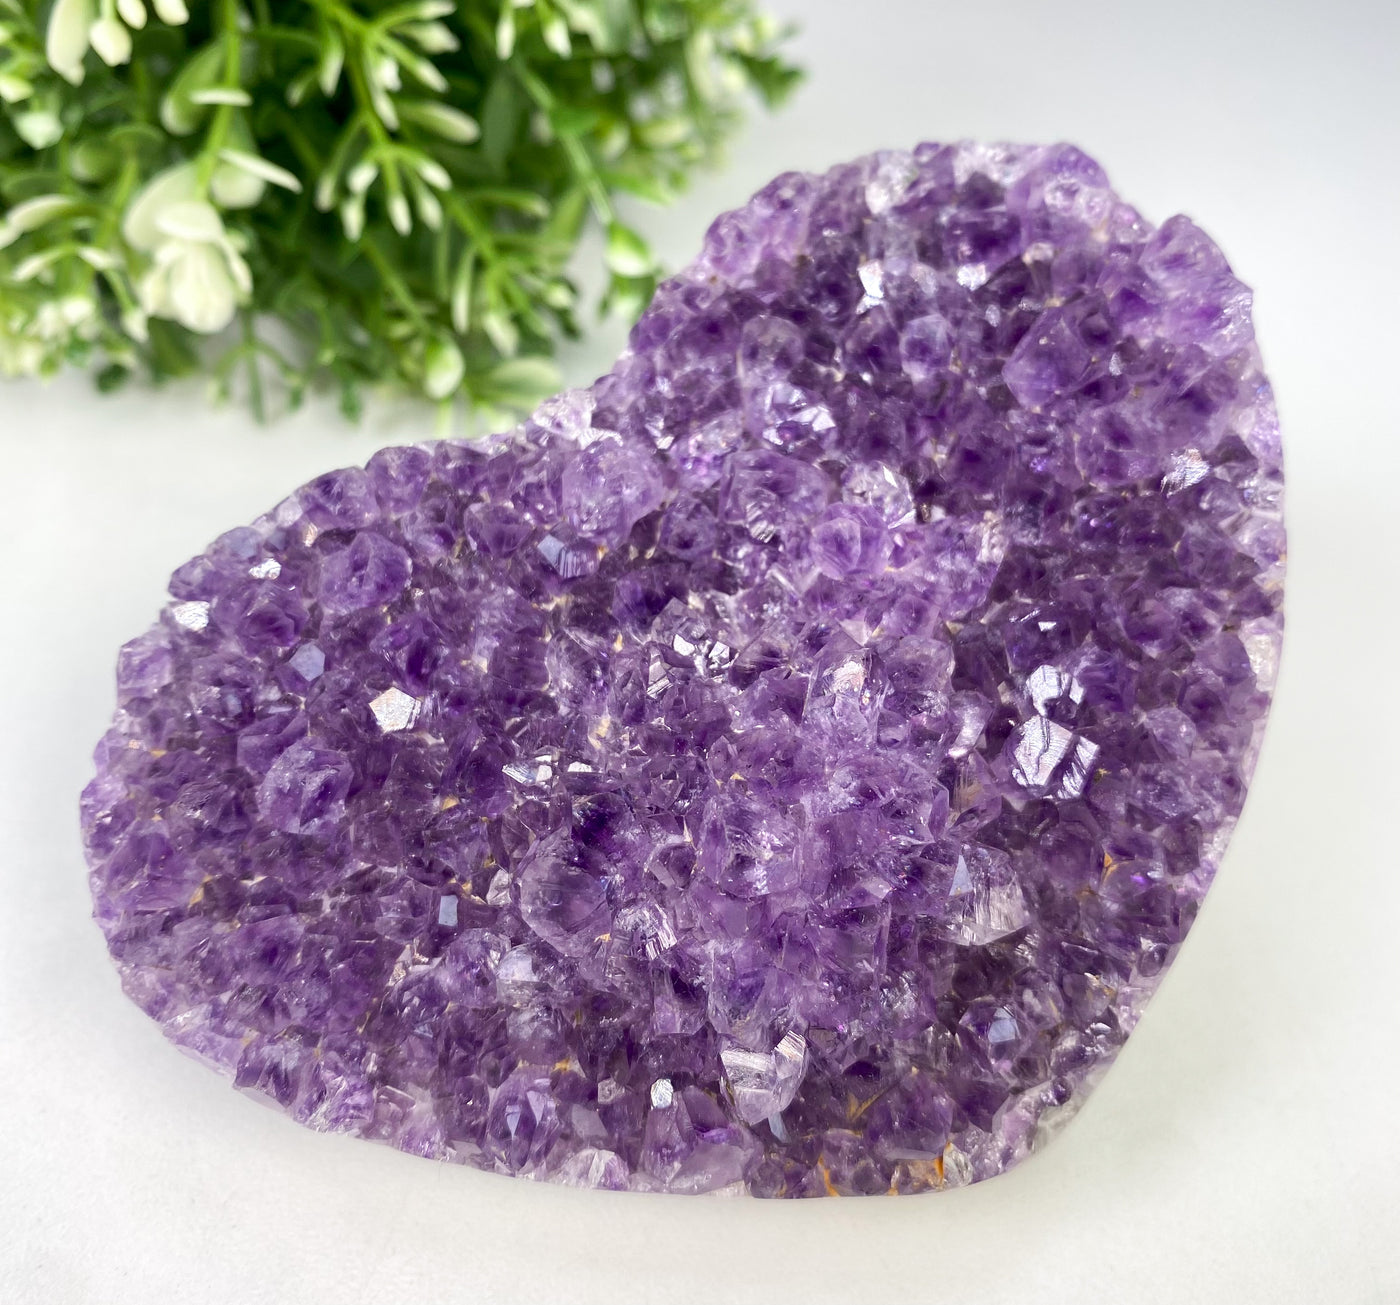 Amethyst heart for strengthening intuition